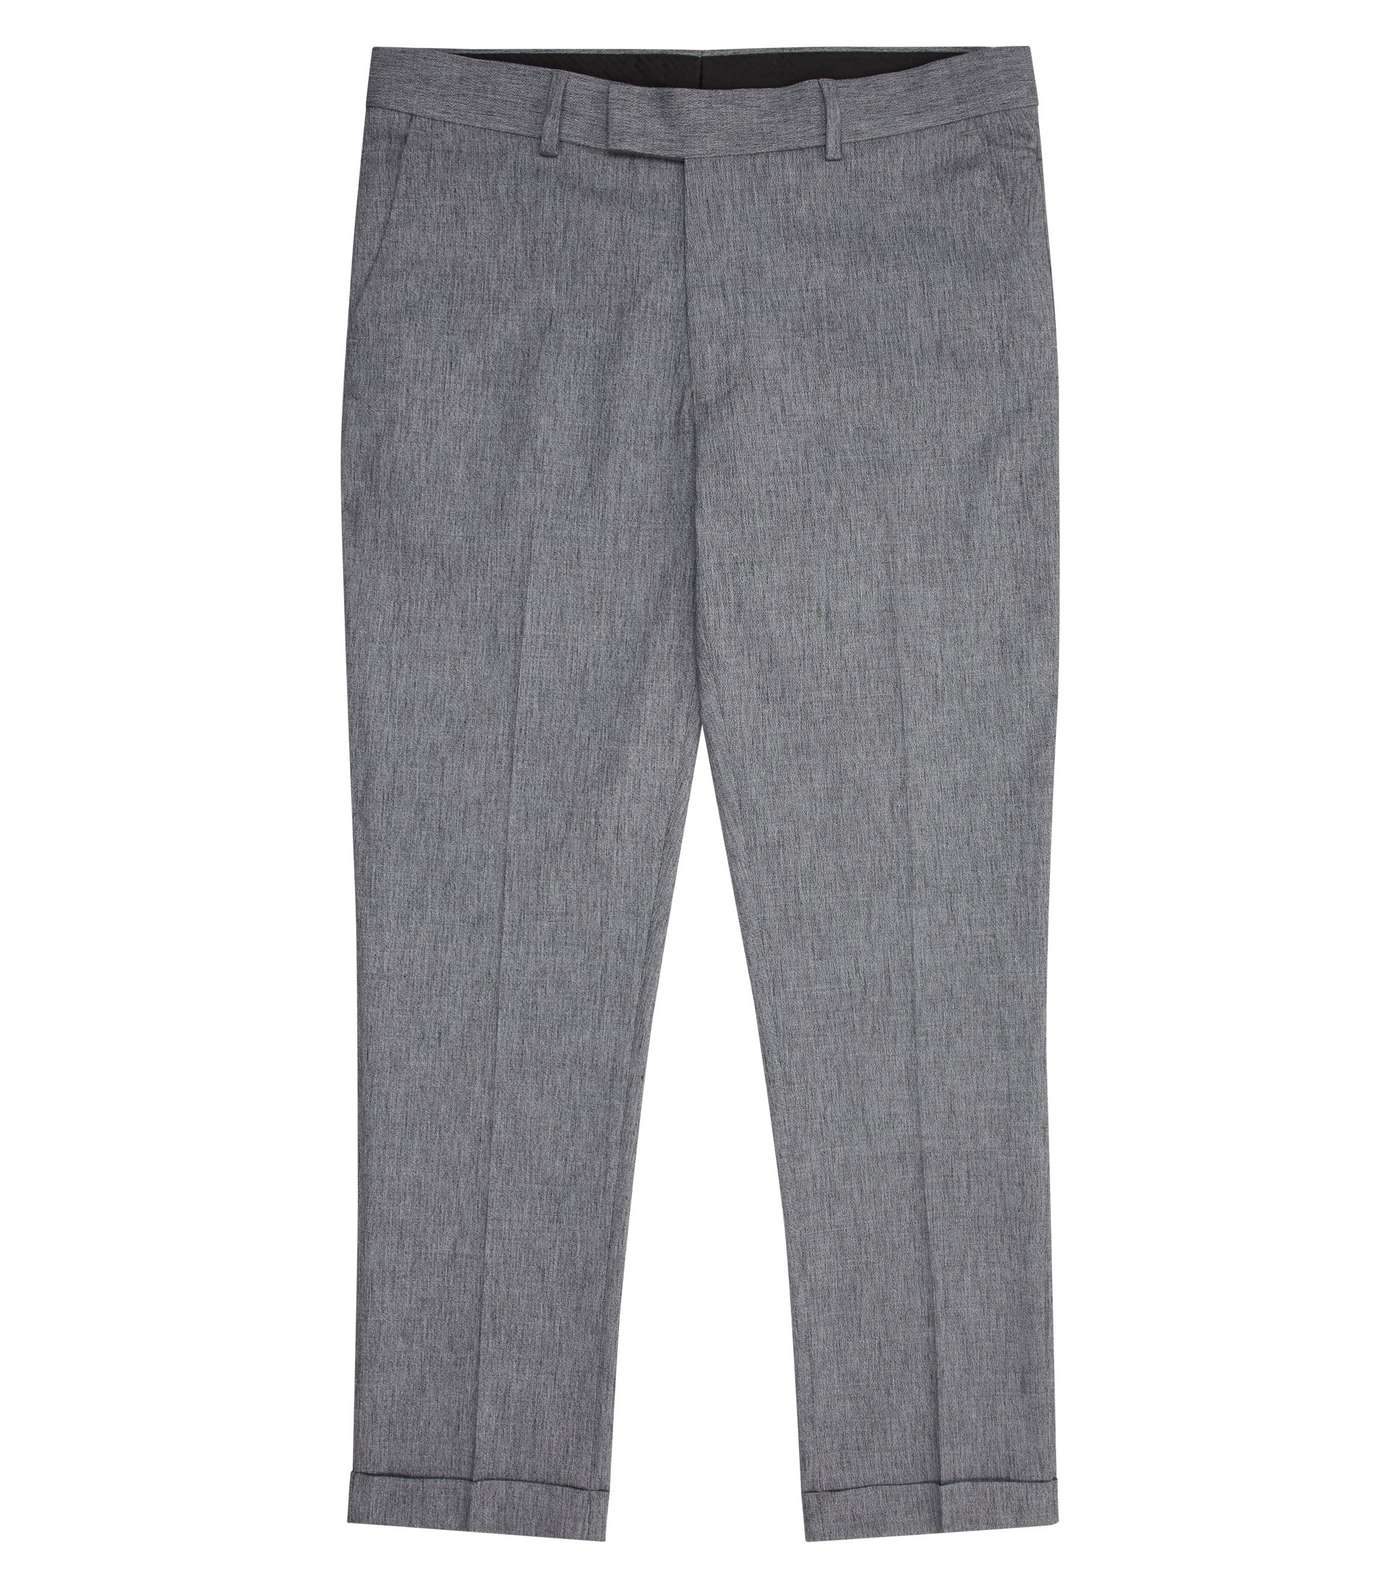 Grey Marl Skinny Cropped Trousers Image 4